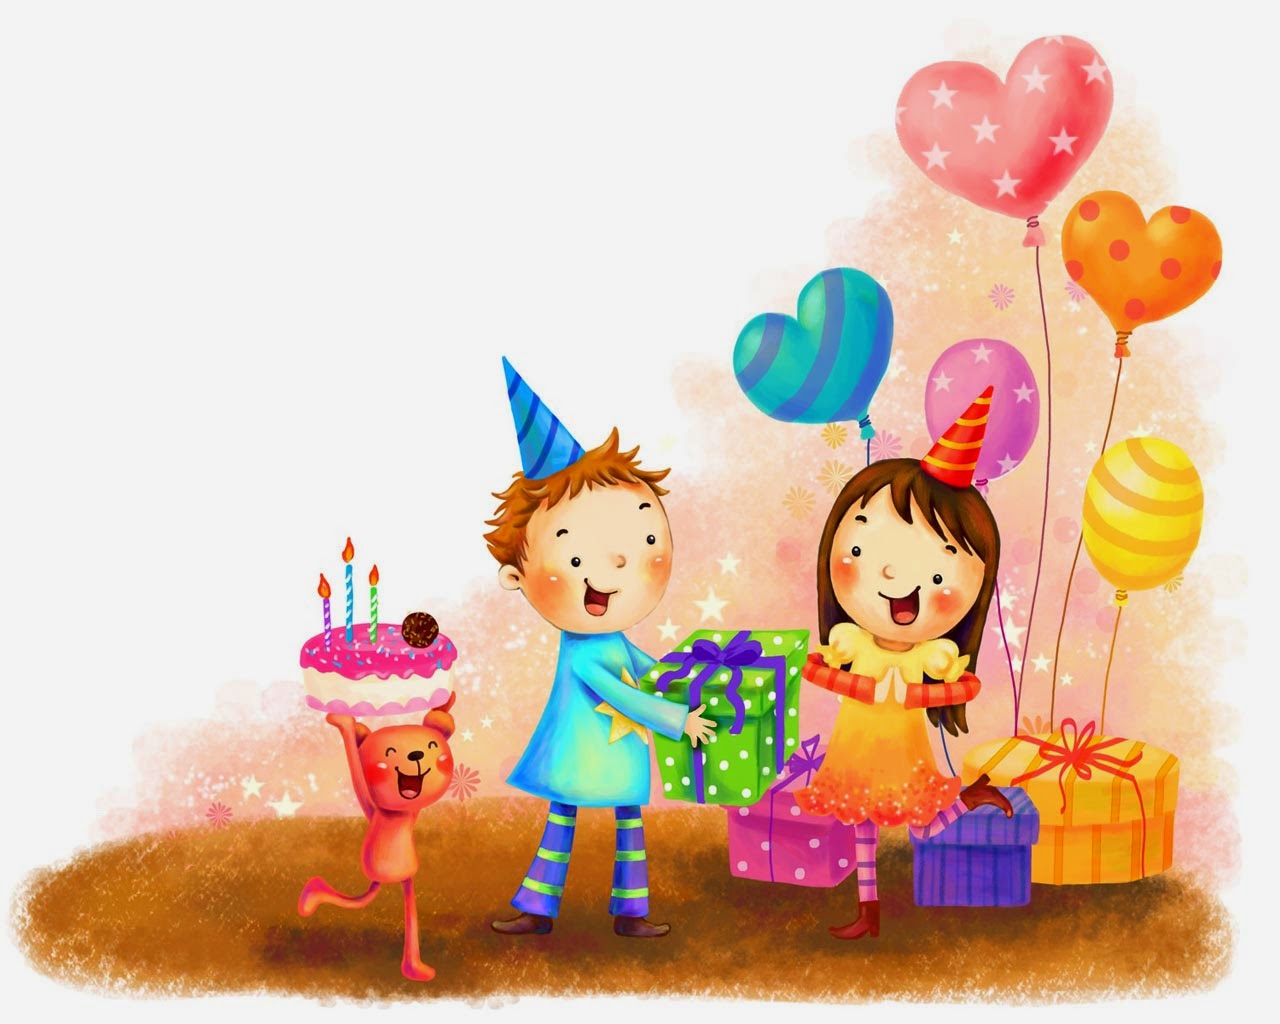 PIXHOME: Happy Birthday wishes card images with cakes, candles 